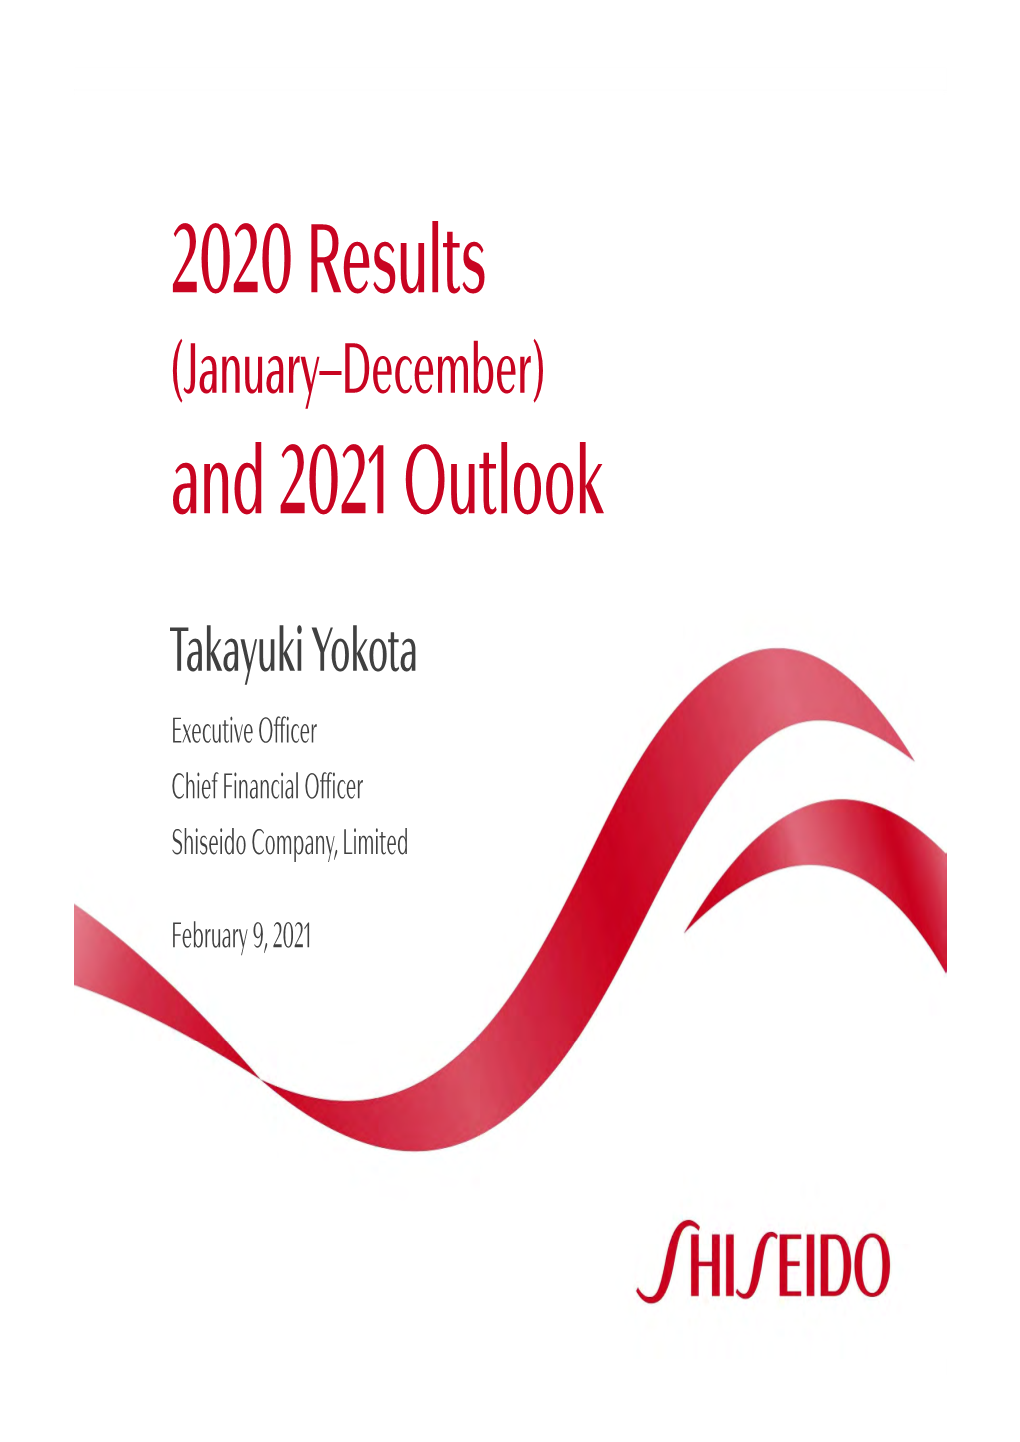 2020 Results and 2021 Outlook